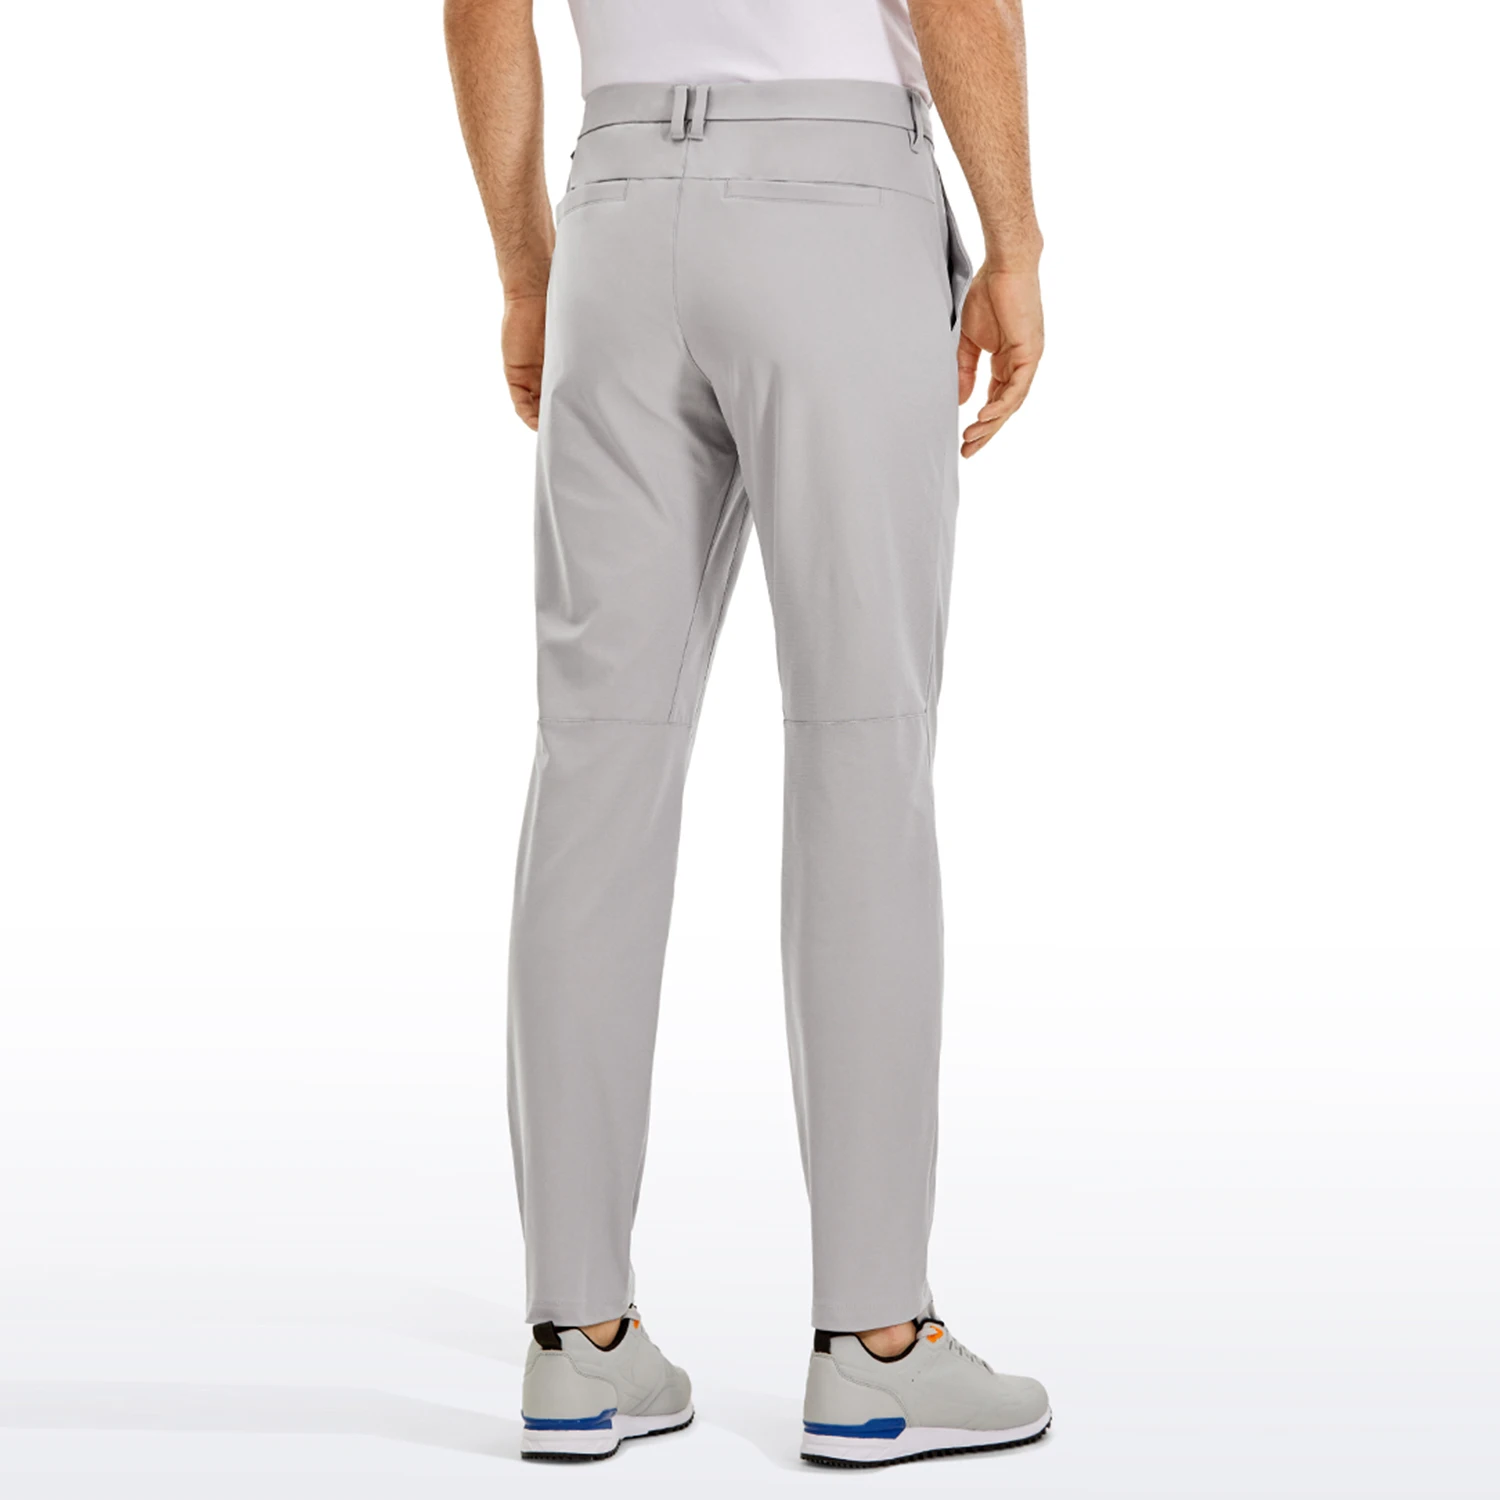 CRZ YOGA US Overseas Warehouse Mens Stretch Golf Pants - 32'' Slim Fit Work  Pants Stretch Quick Dry 5-pocket Thick Travel Pants